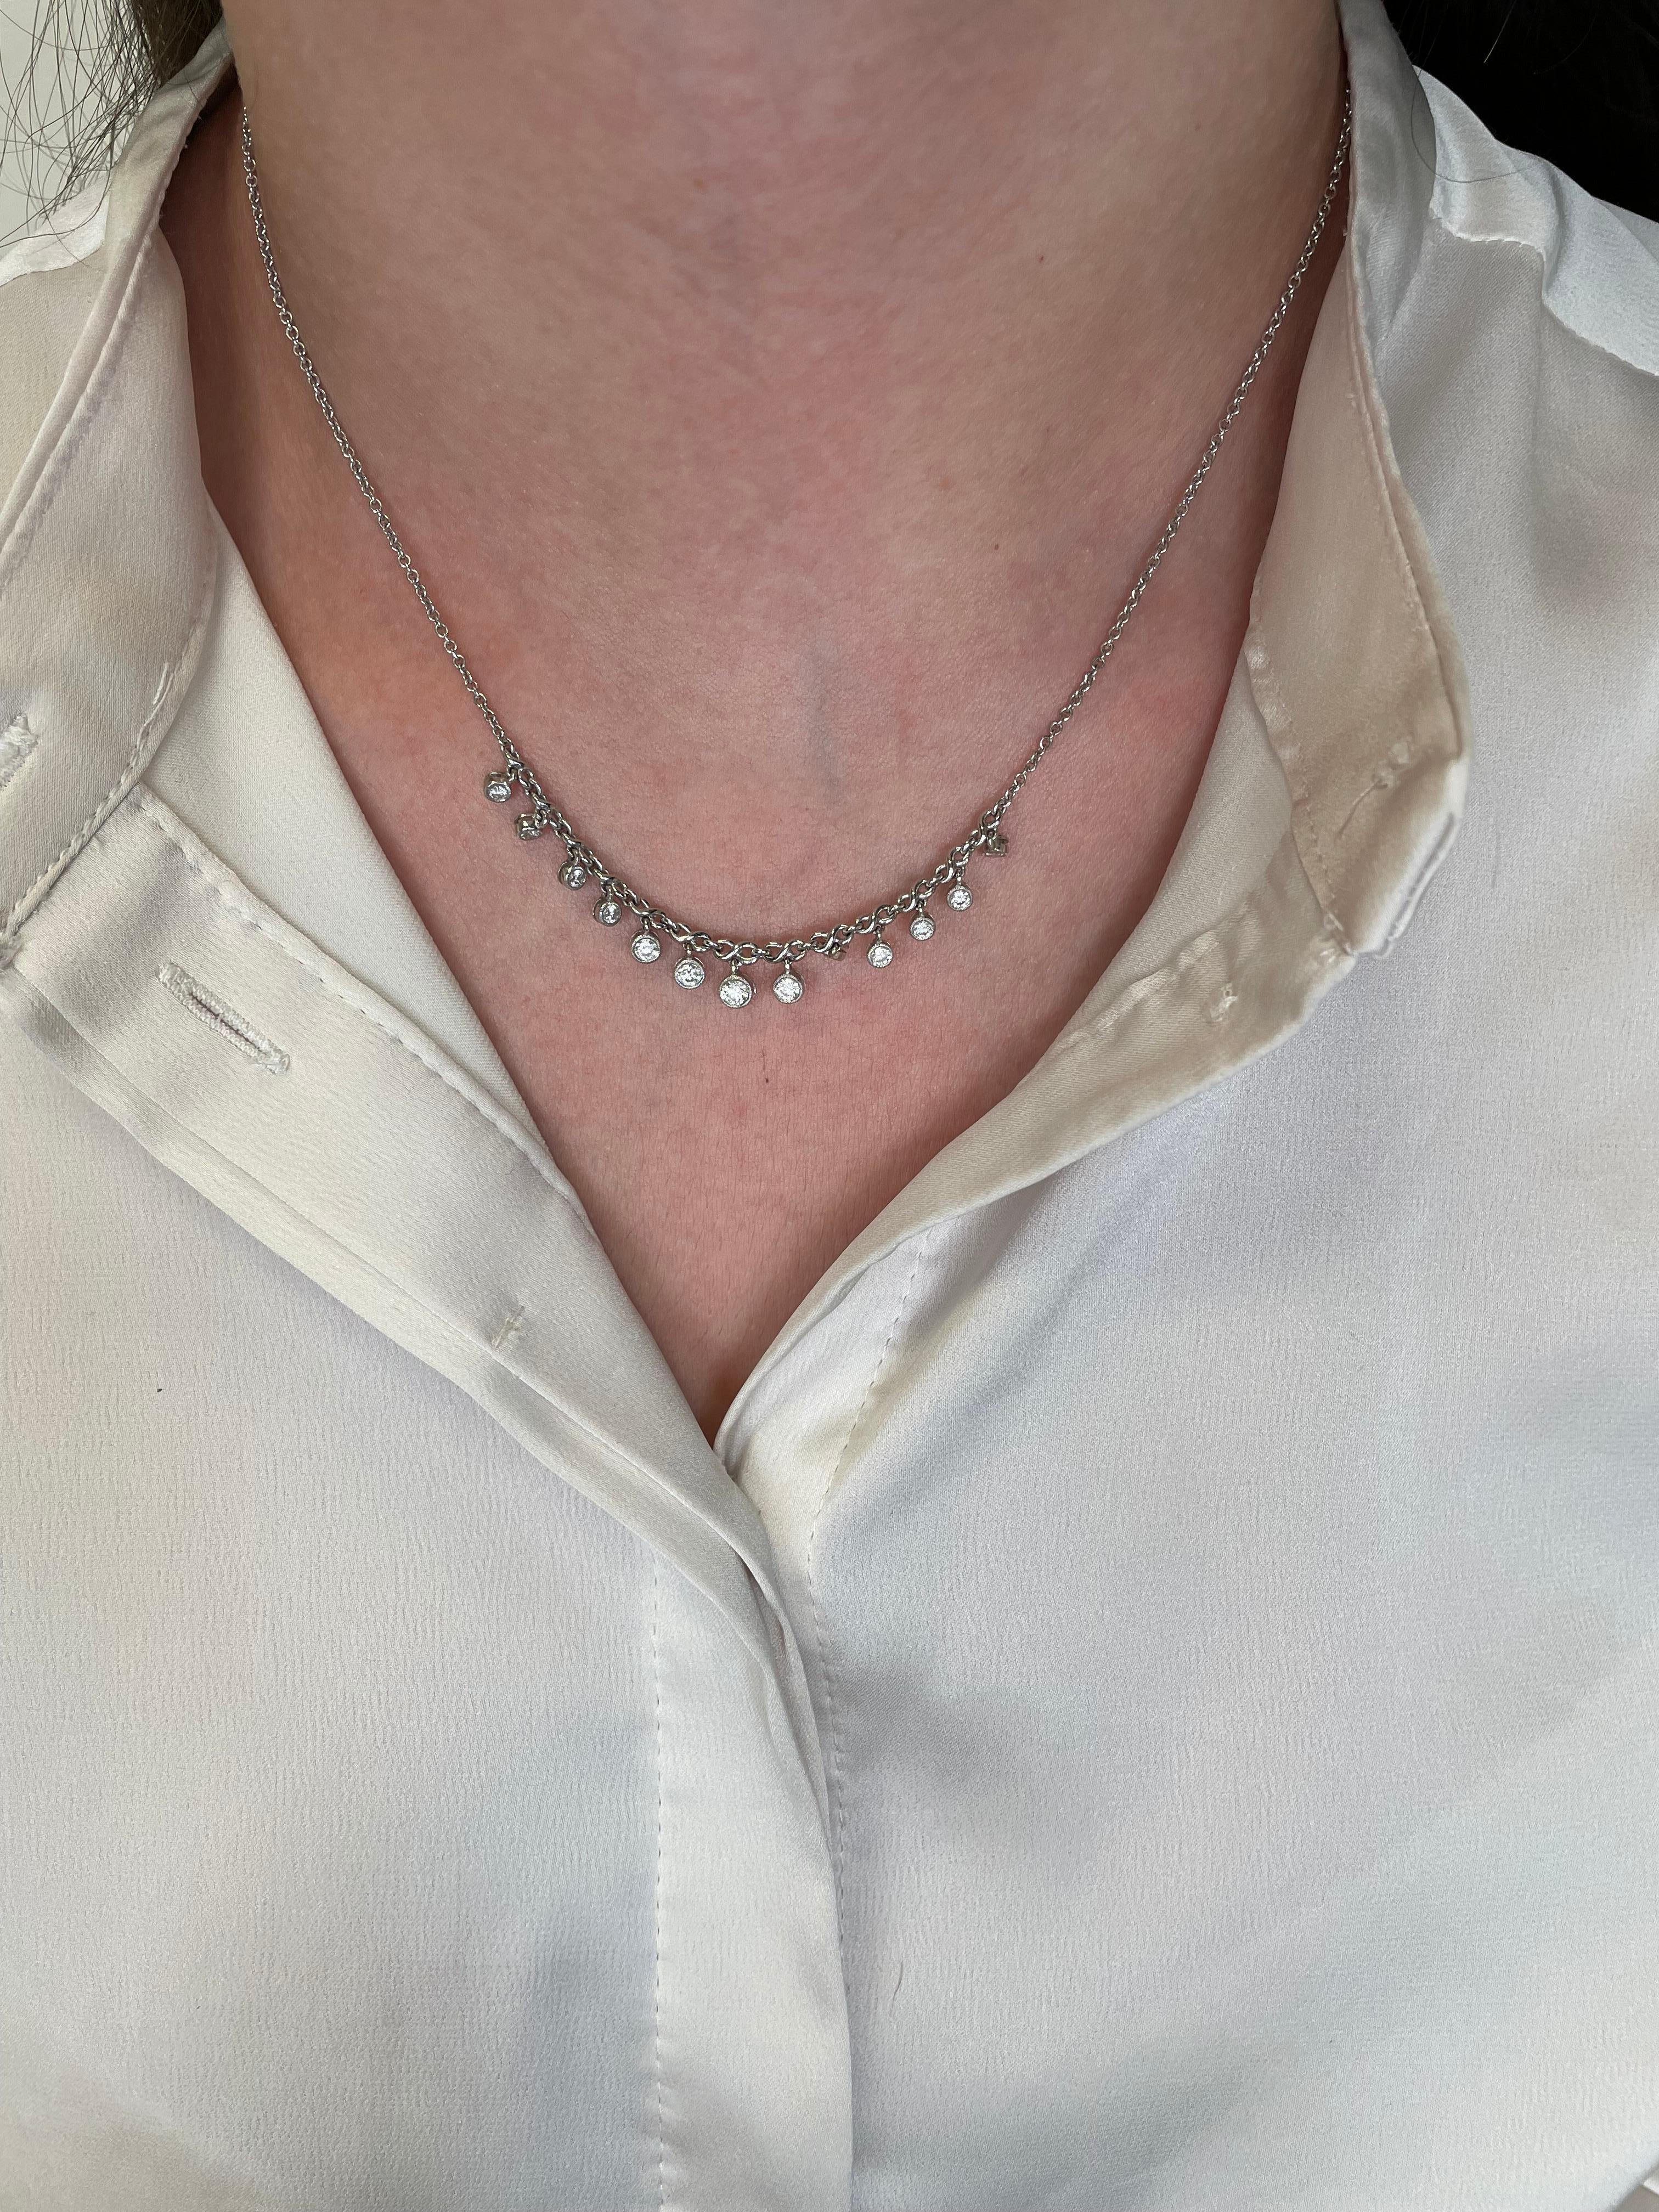 Lovely dangling diamond necklace, bezel set.
13 round brilliant diamonds, 0.82 carats. Approximately G/H color and SI clarity. 18-karat white gold.
Accommodated with an up to date appraisal by a GIA G.G. upon request. Please contact us with any